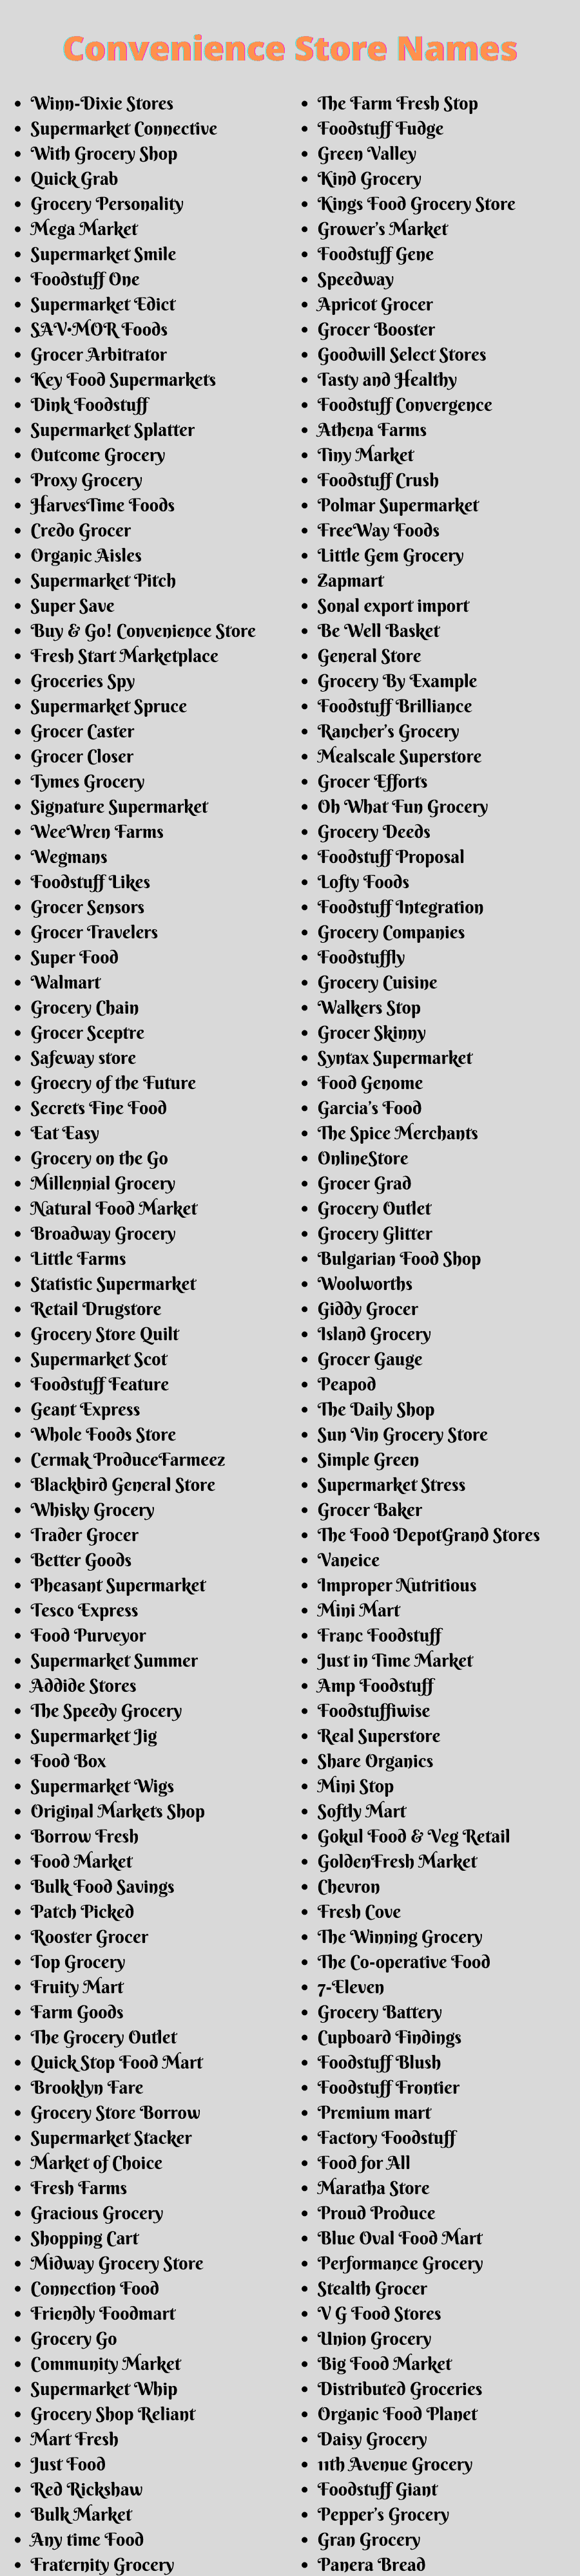 Convenience Store Names